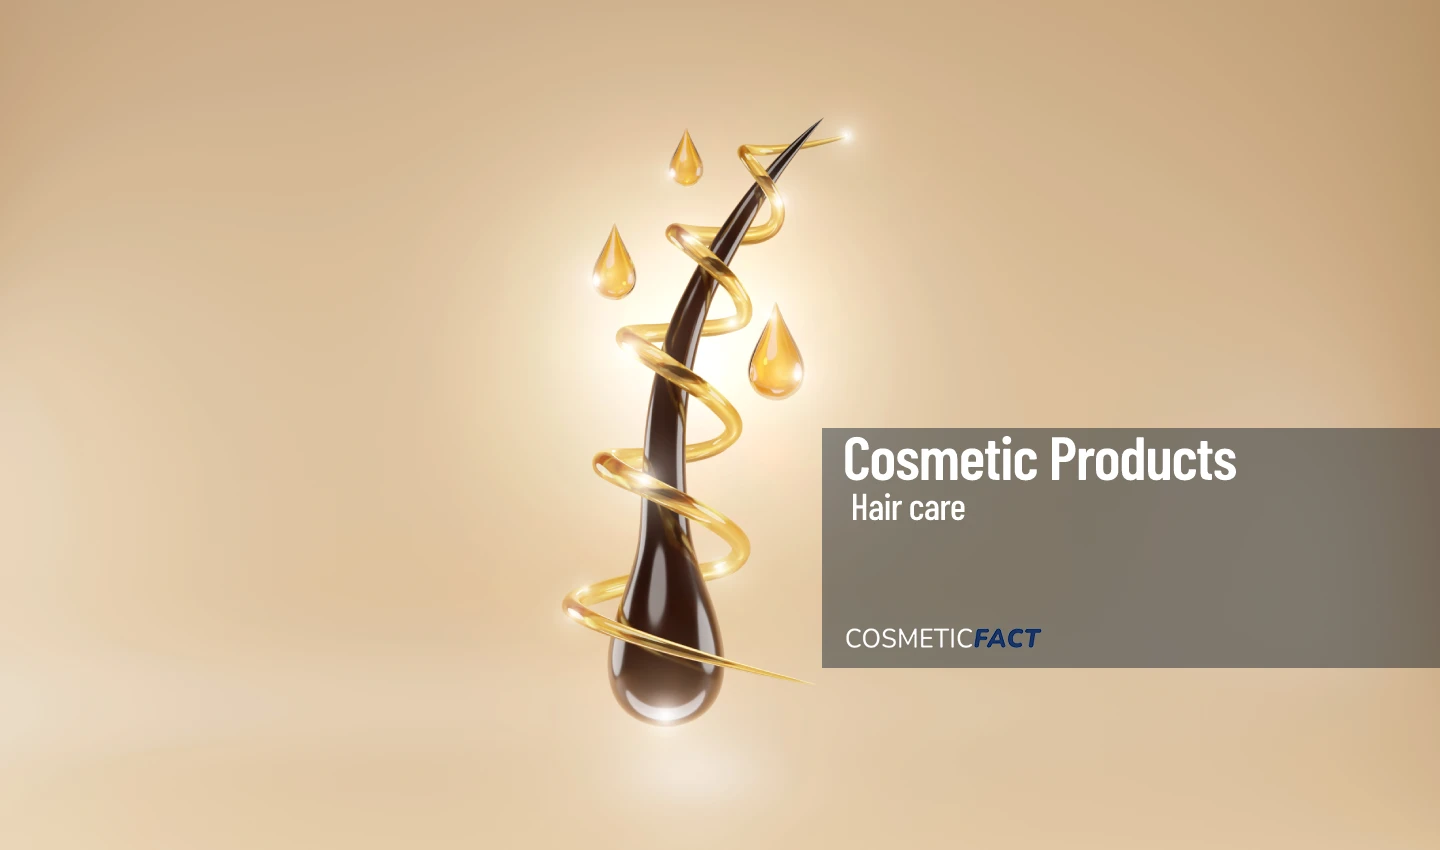 Image of hair with Smart Conditioner applied, showcasing the future of haircare with intelligent hair management.